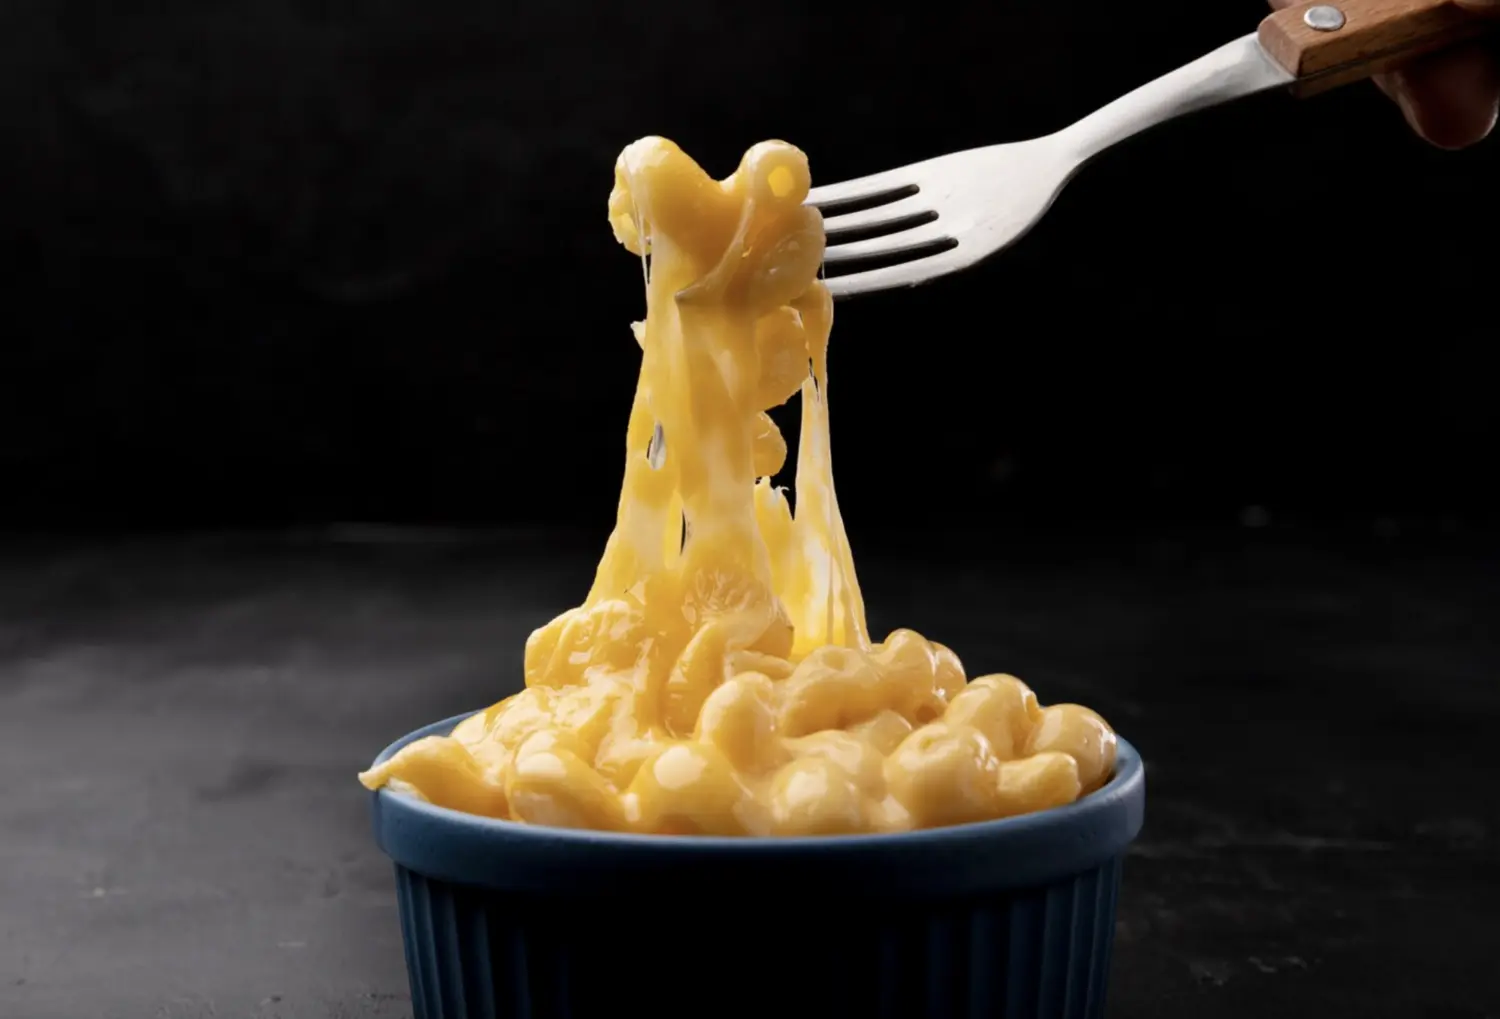 Copycat Chick-Fil-A Mac and Cheese